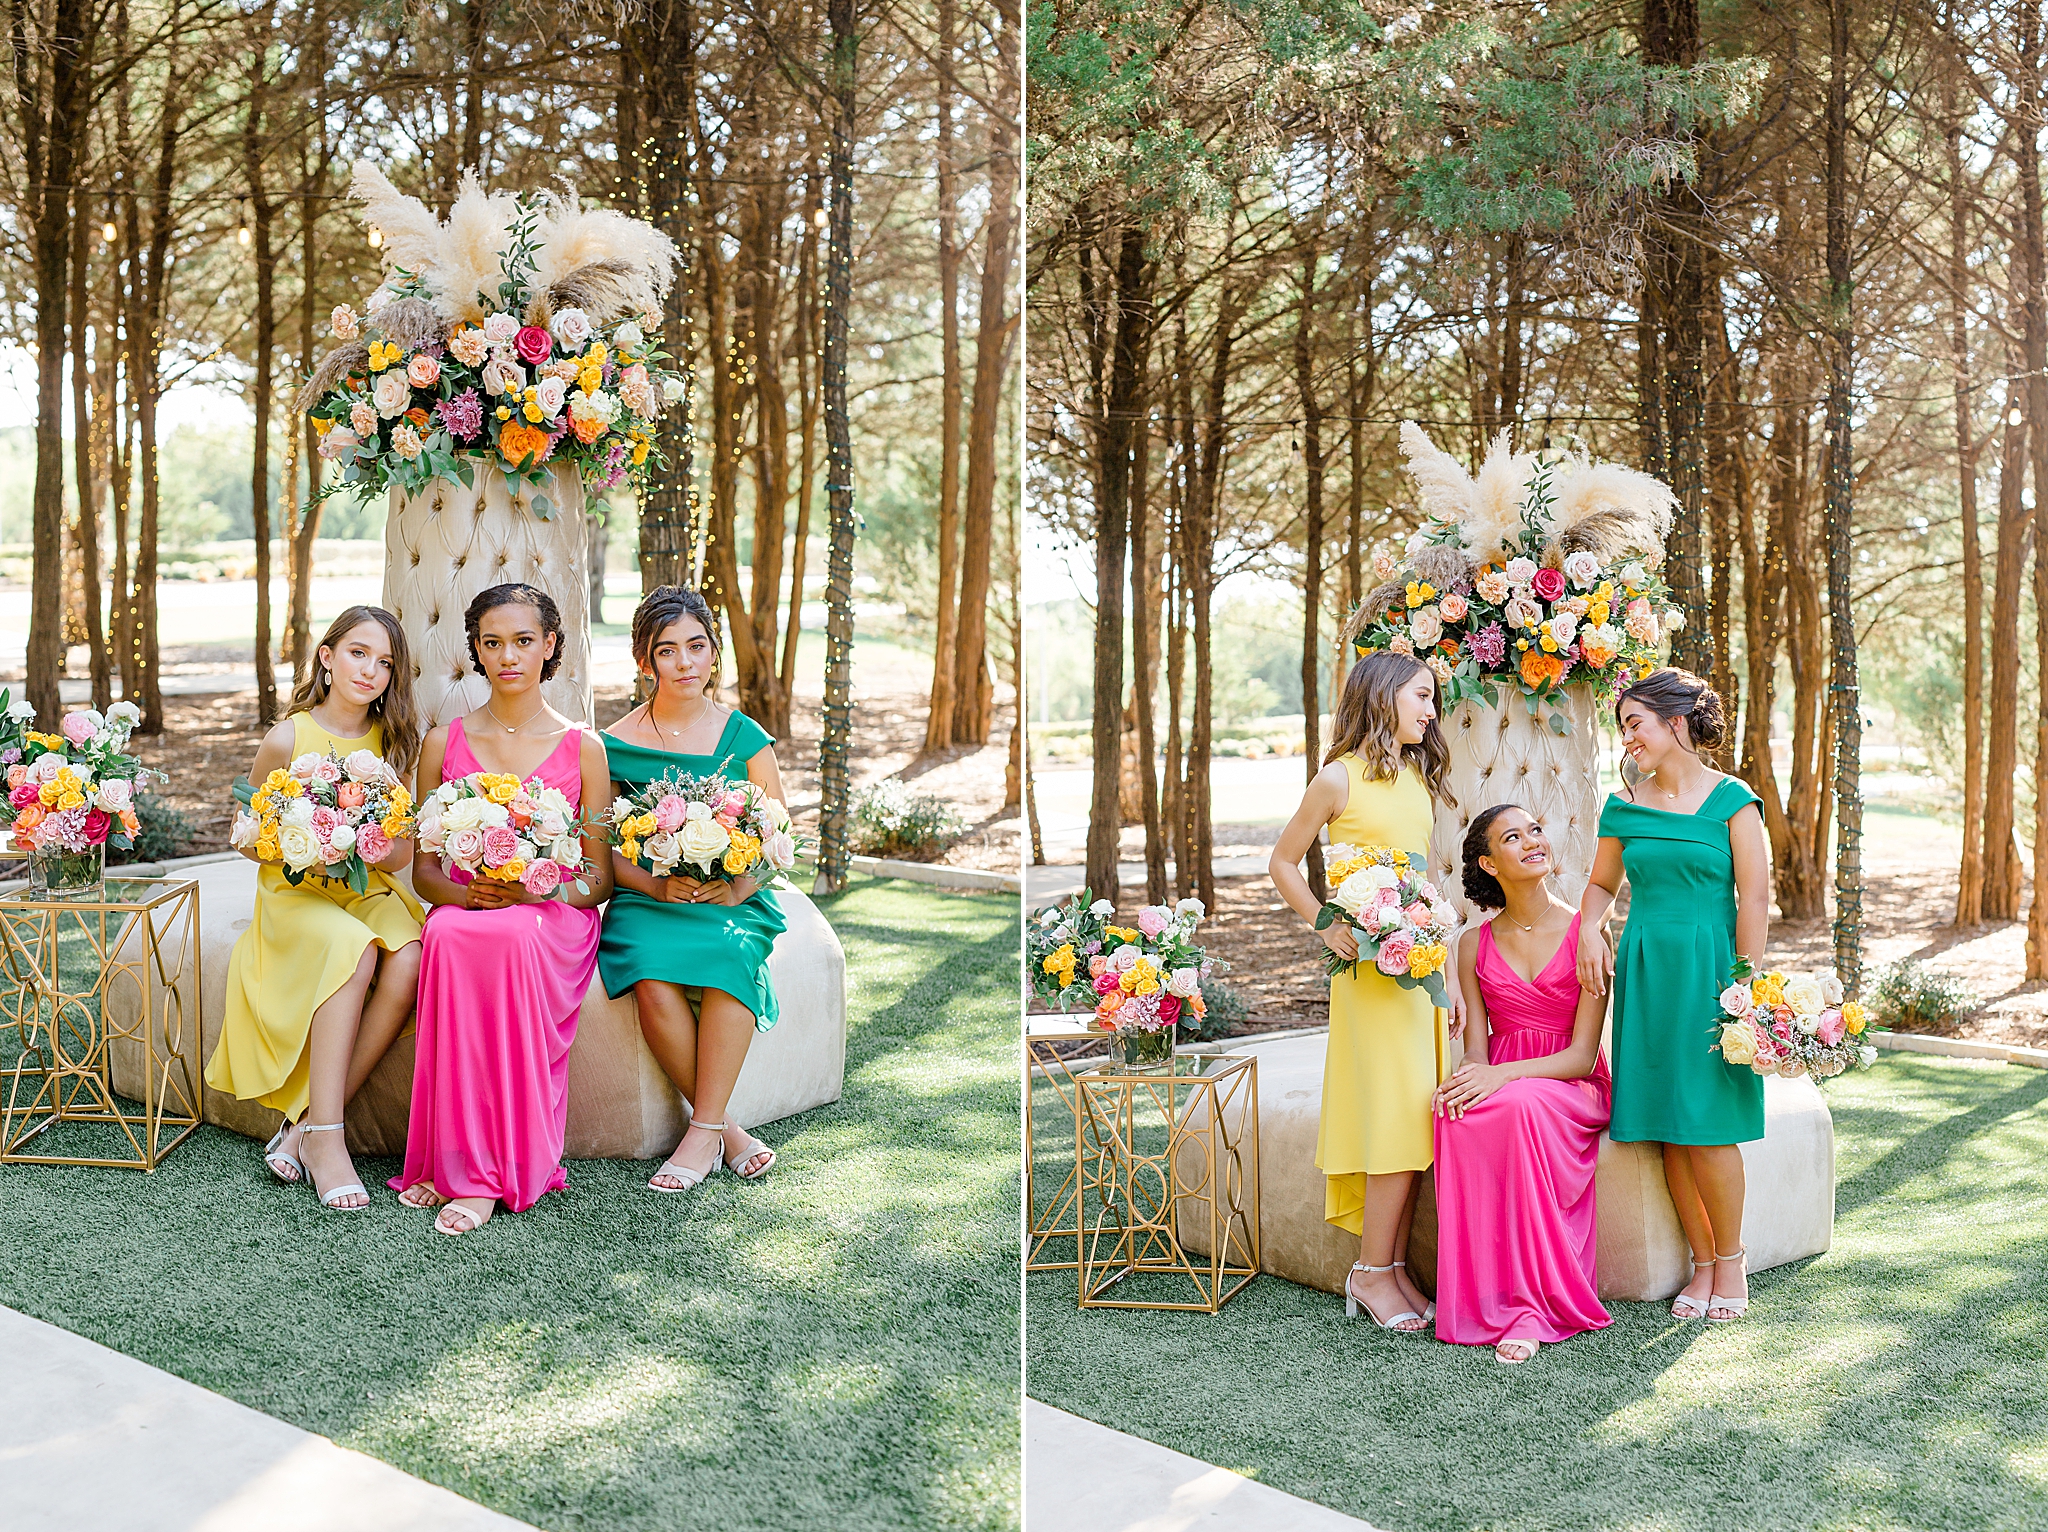 Junior Bridesmaids Styled Shoot with bridesmaids in citrus inspired colors